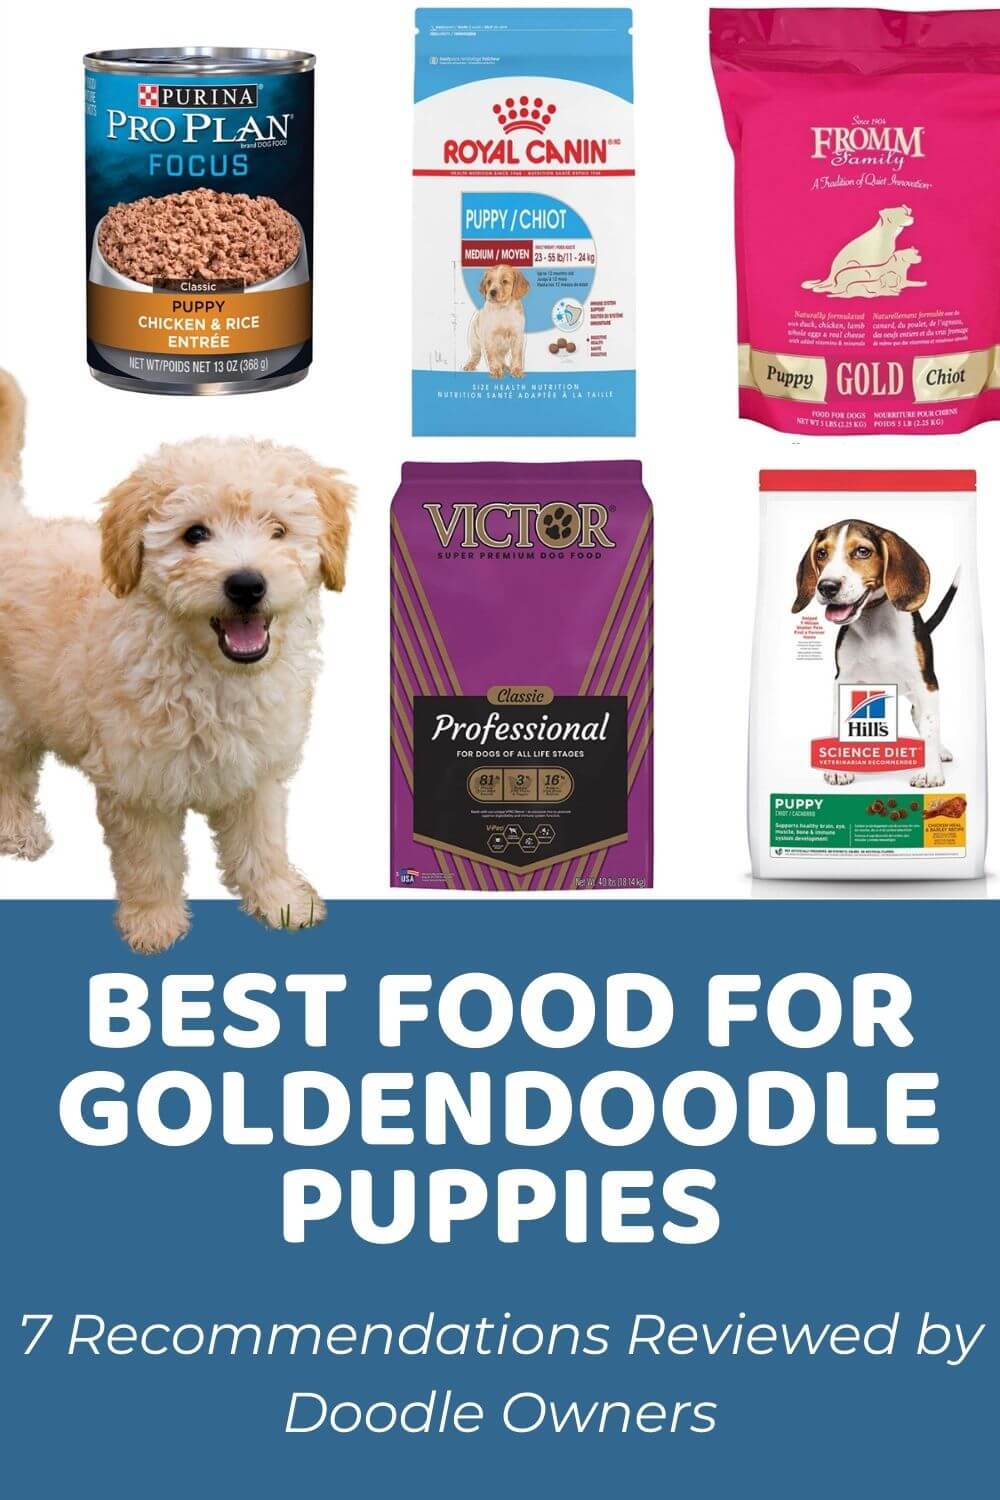 What Is the Best Food for a Goldendoodle?